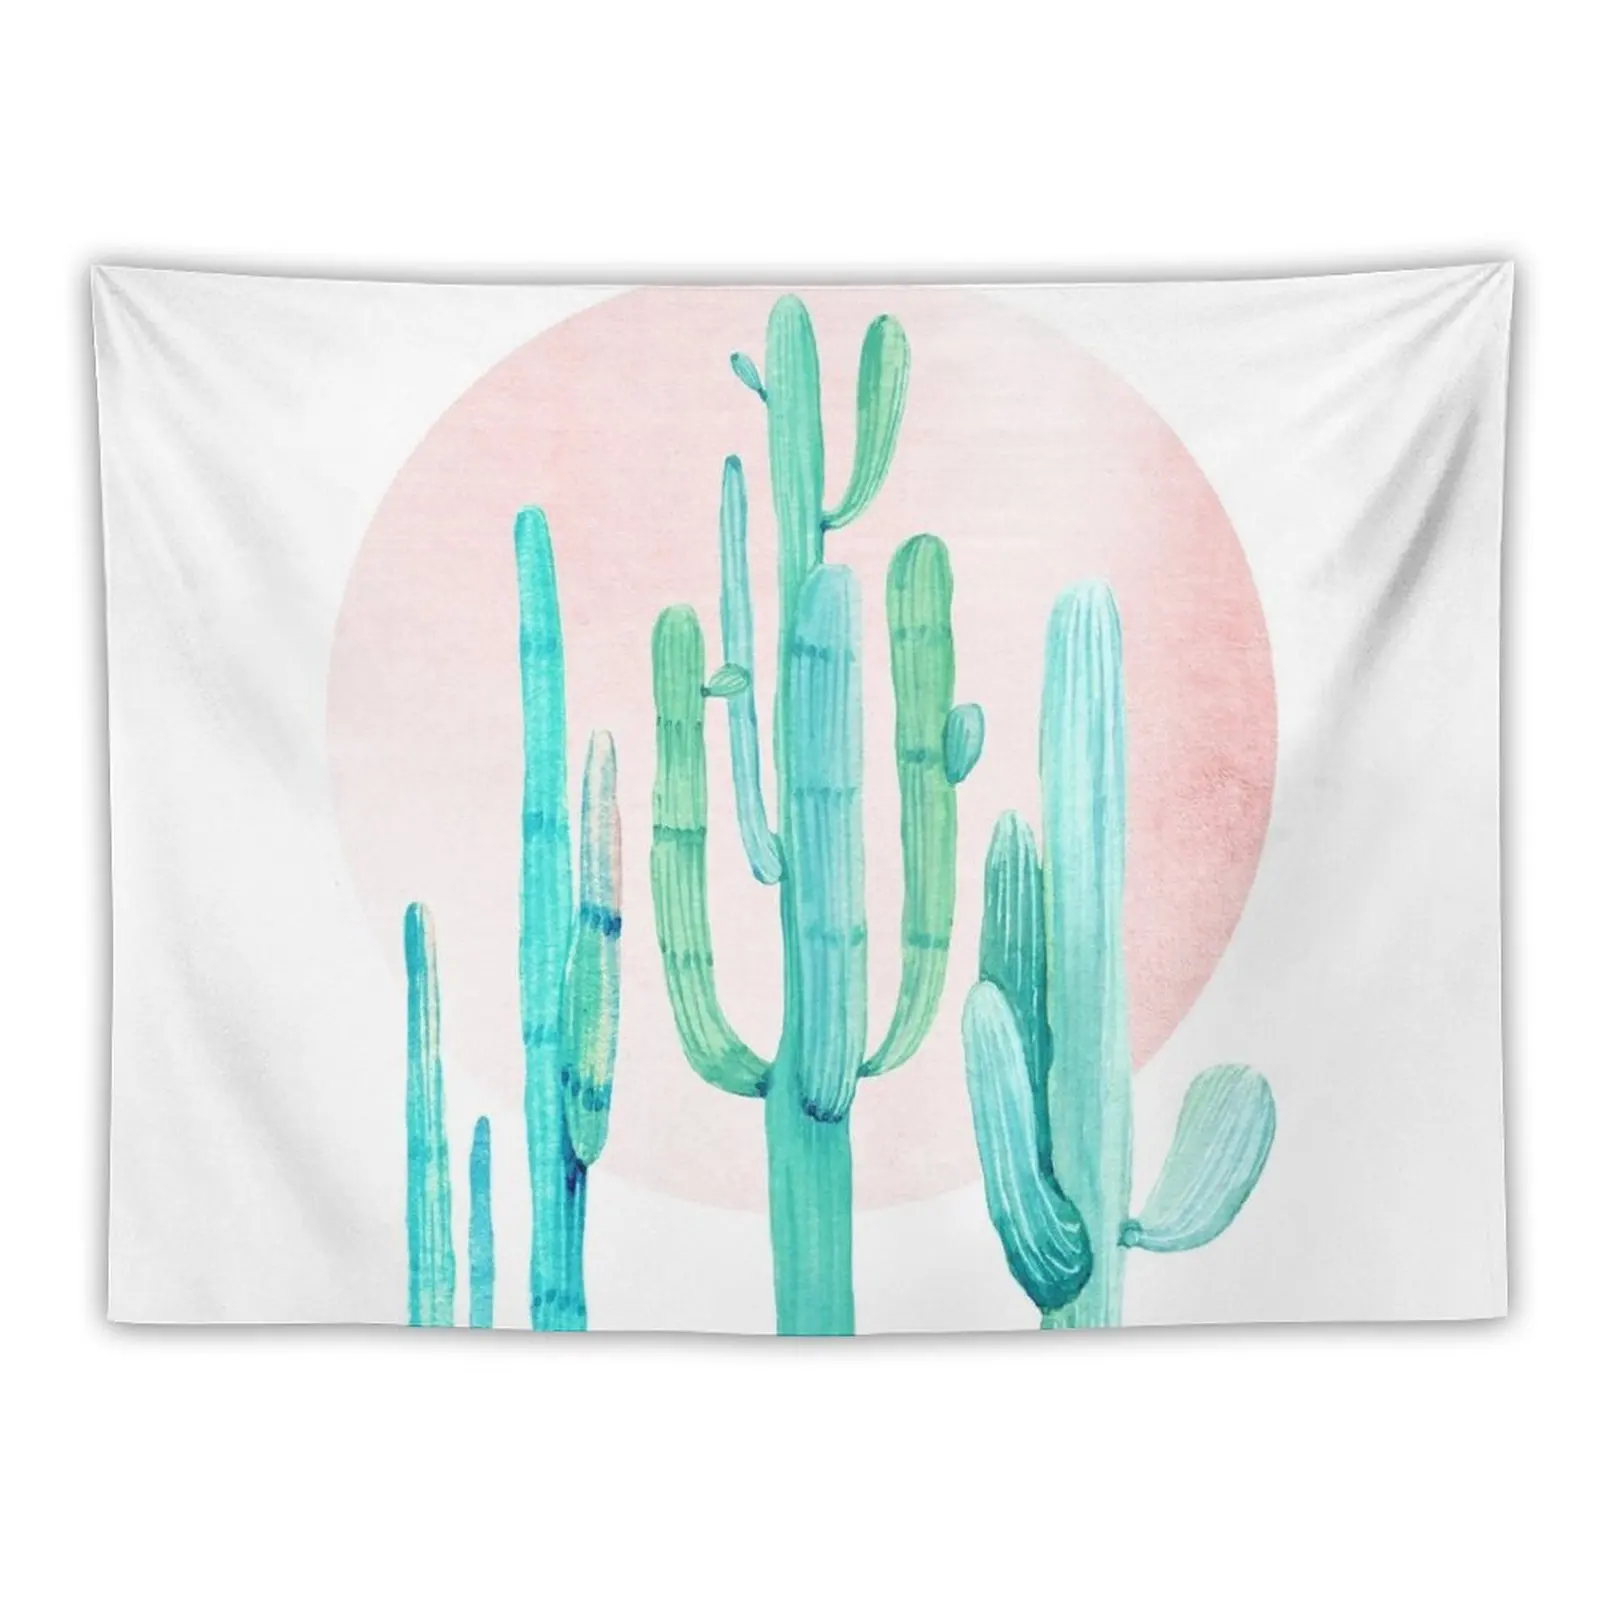 

Pretty Cactus Rosegold Pink and Turquoise Desert Cacti Southwest Decor Tapestry For Bedroom Bedroom Decoration Tapestry